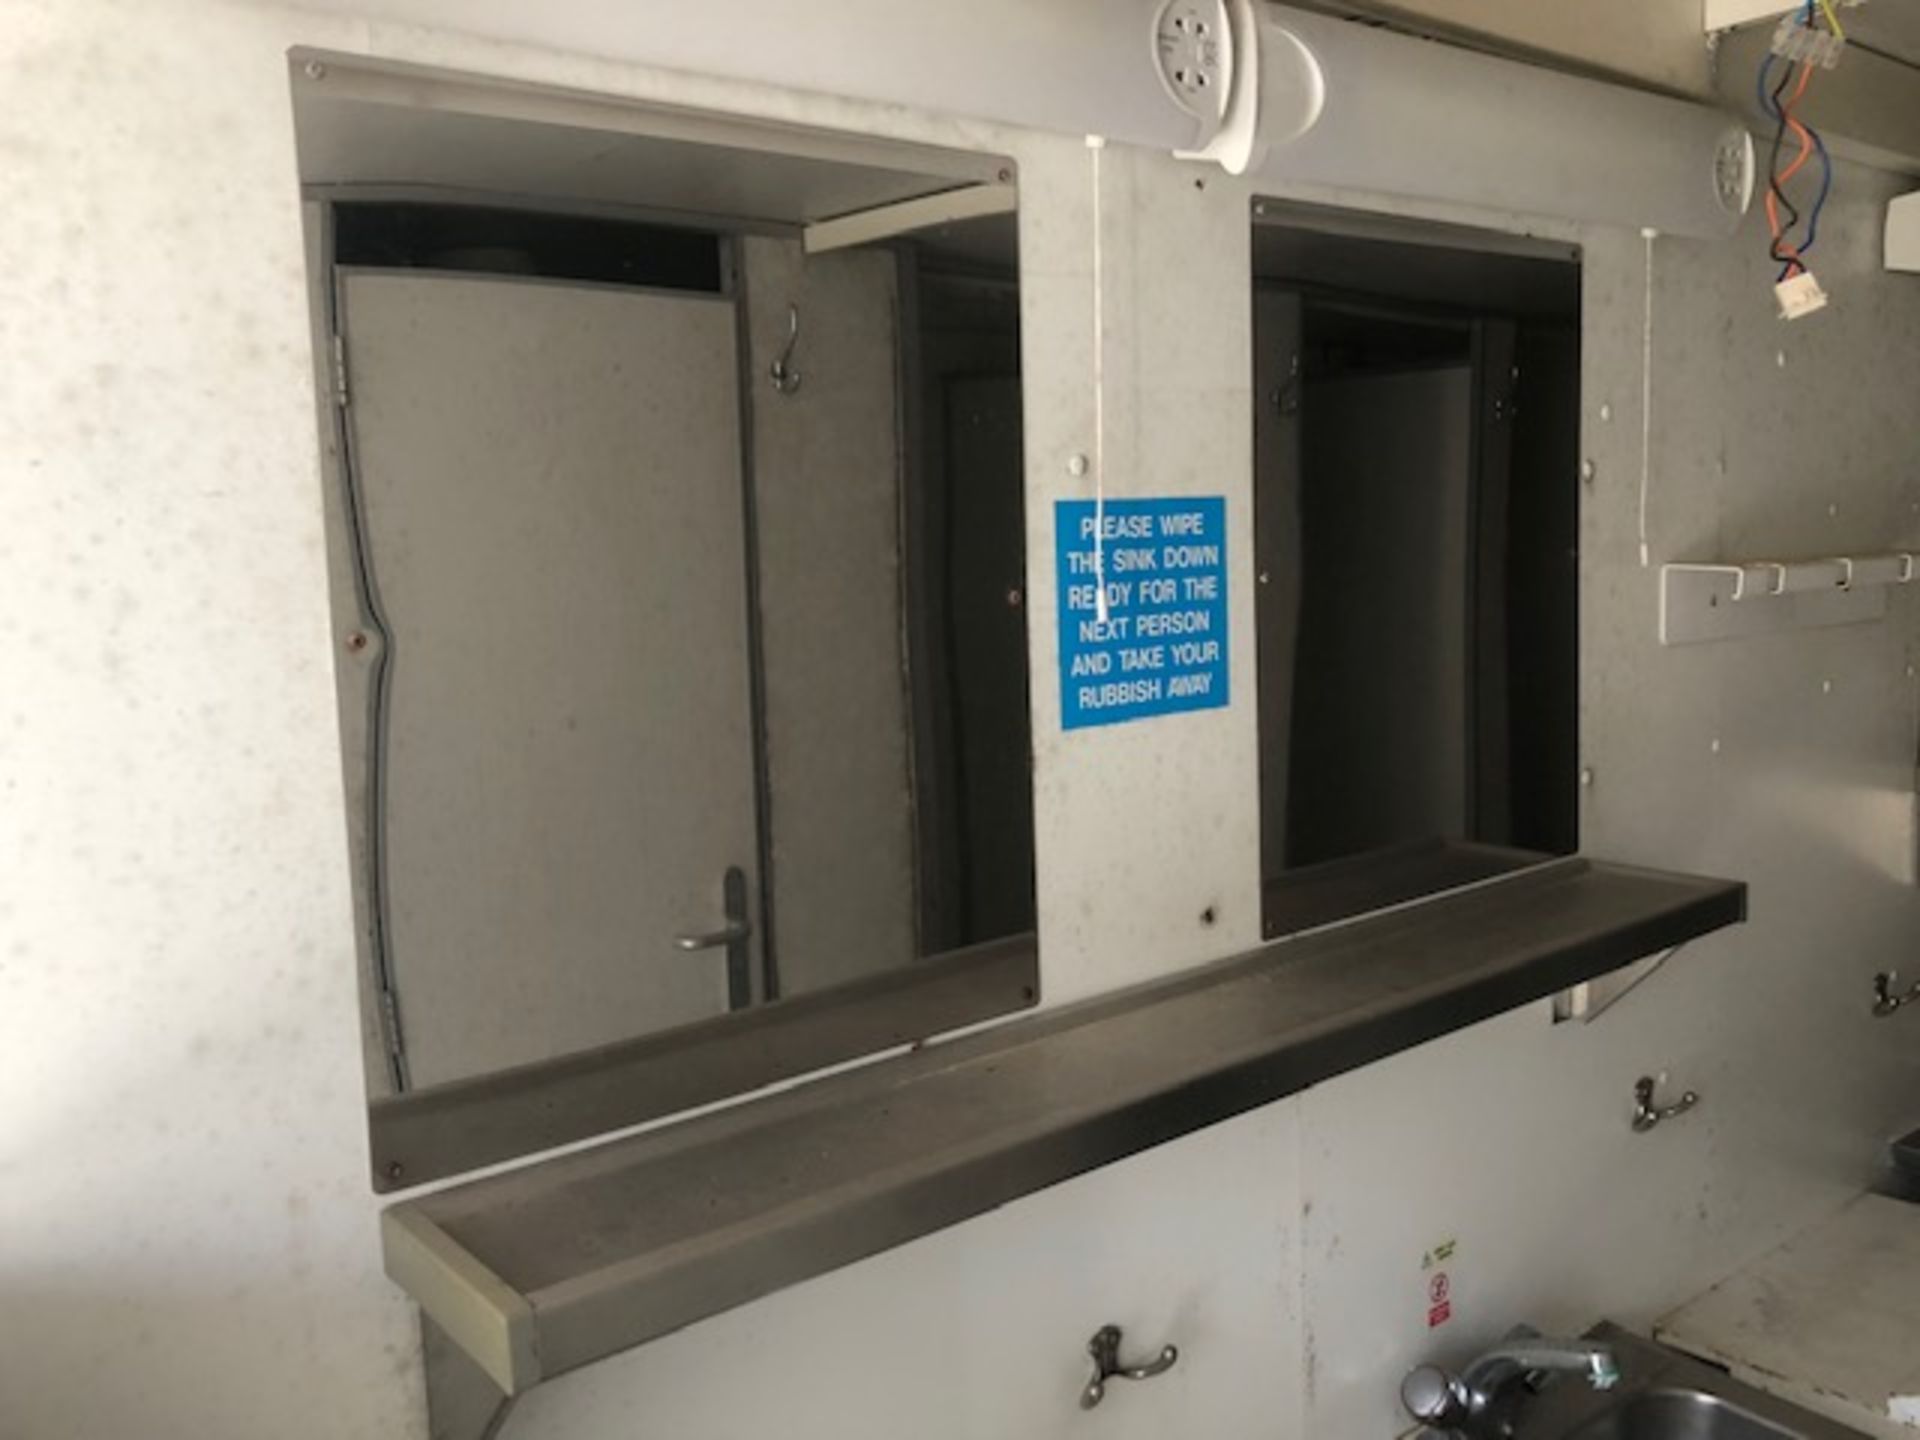 Frontline toilet and shower block unit - Image 24 of 28